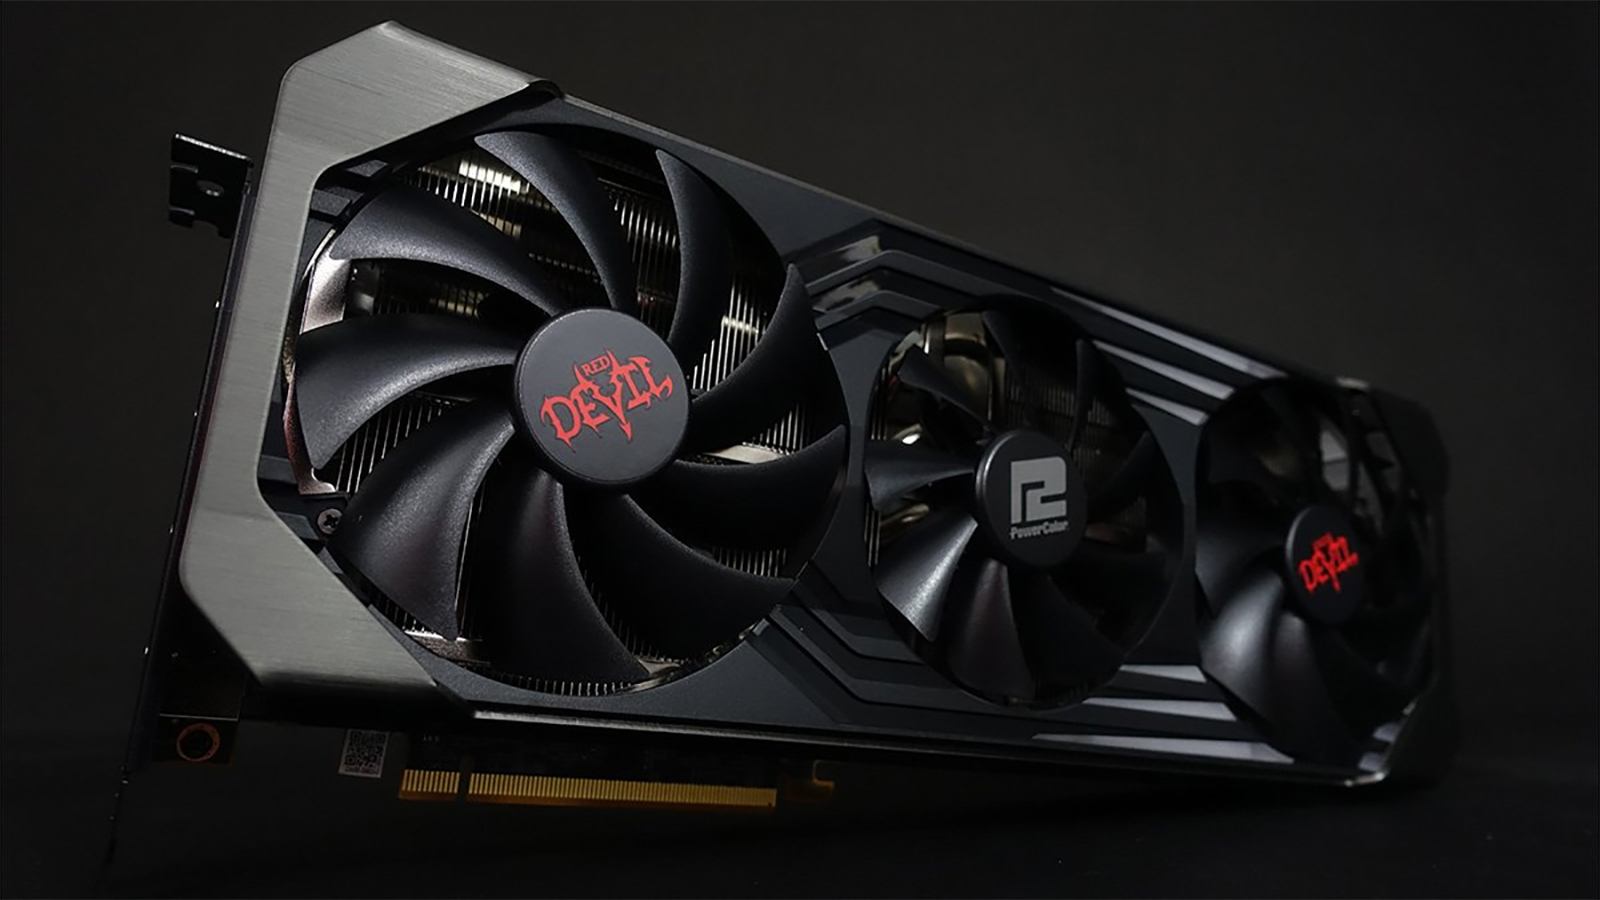 Amd Rx 6950 Xt Gpu Could Boost Over 2.5ghz Out Of The Box